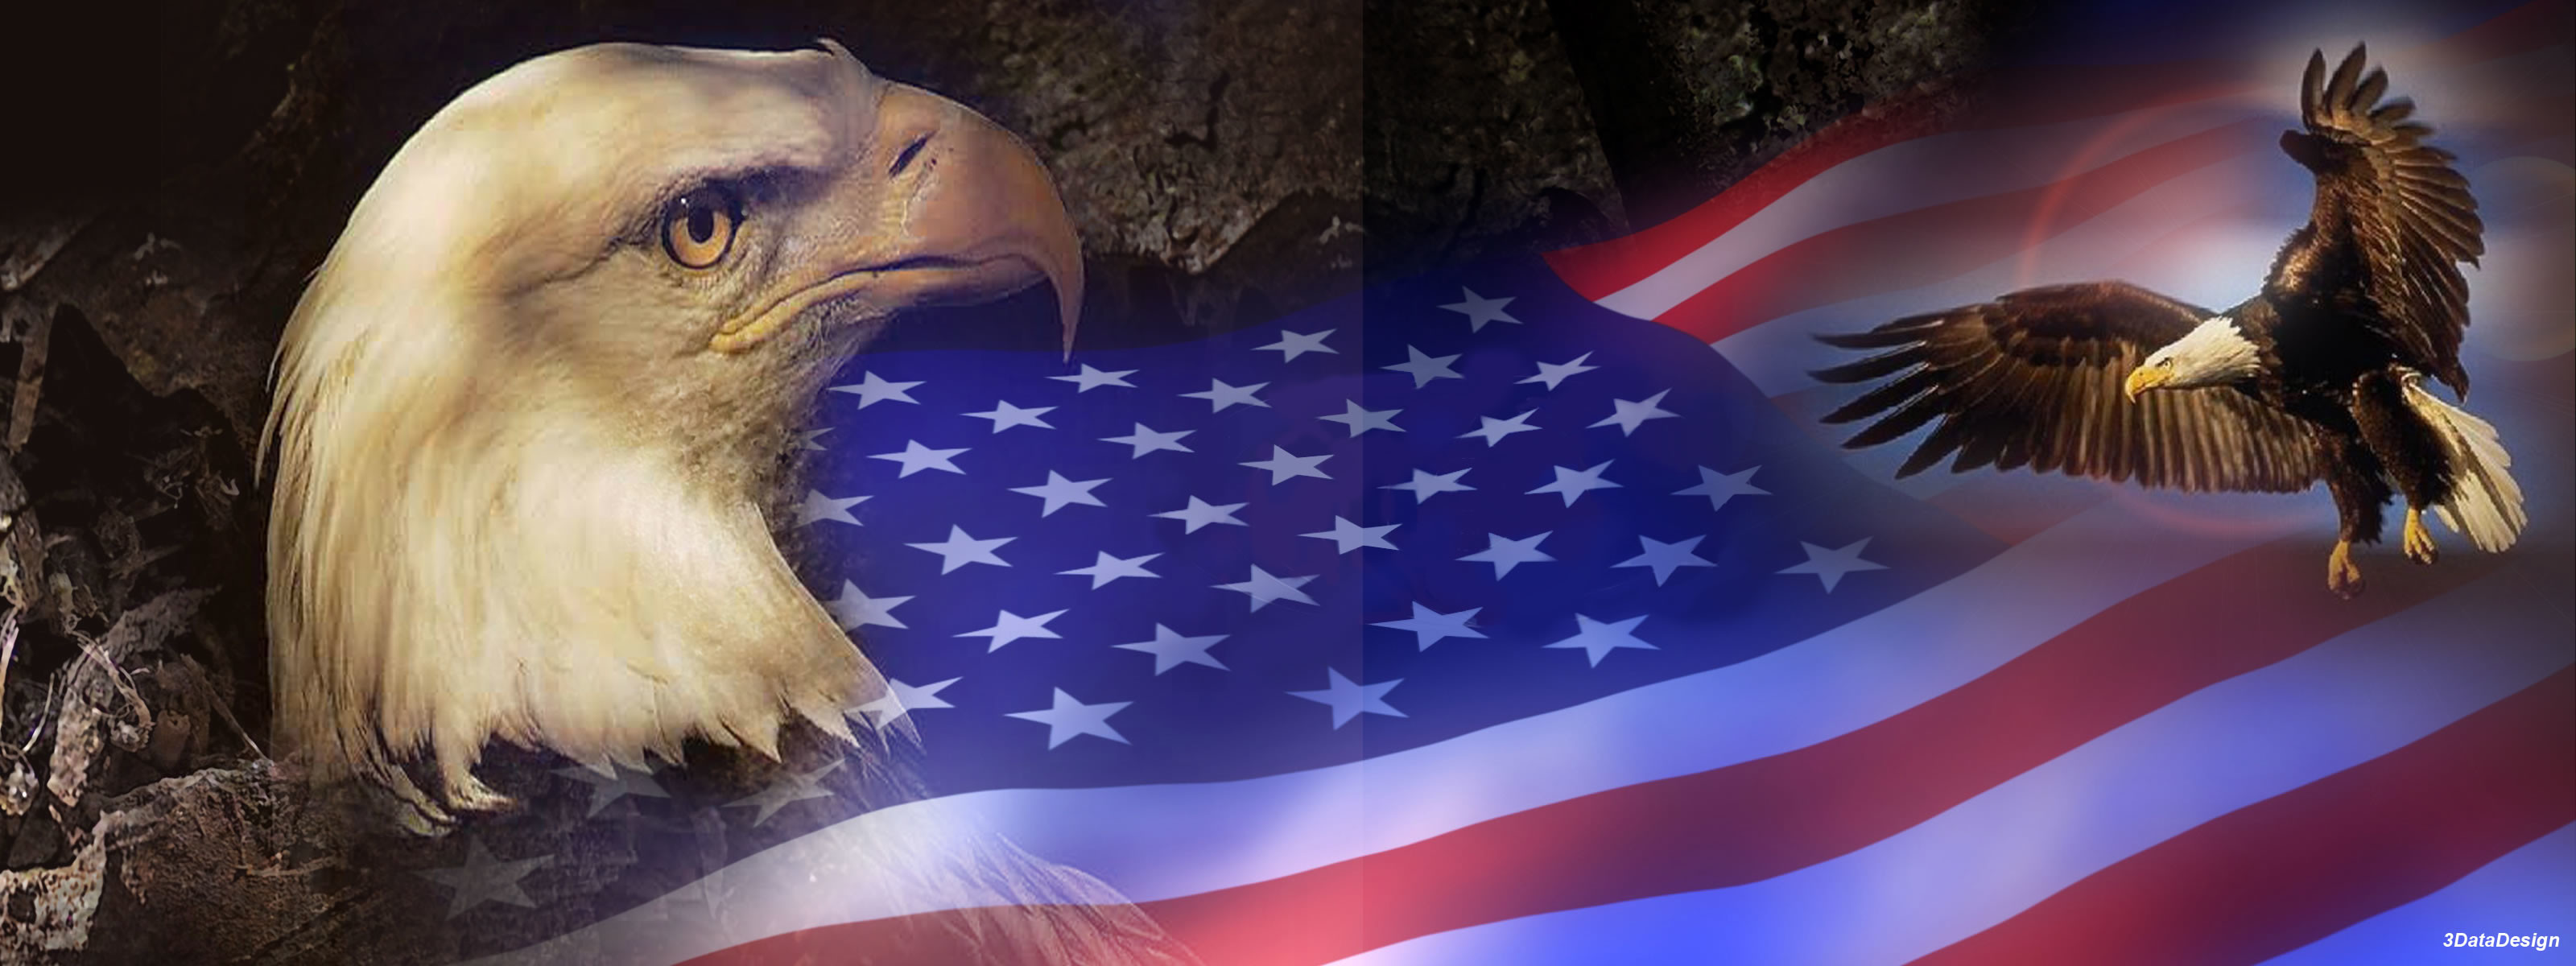 3200x1200 American Flag Background With Eagle Bald eagle american flag